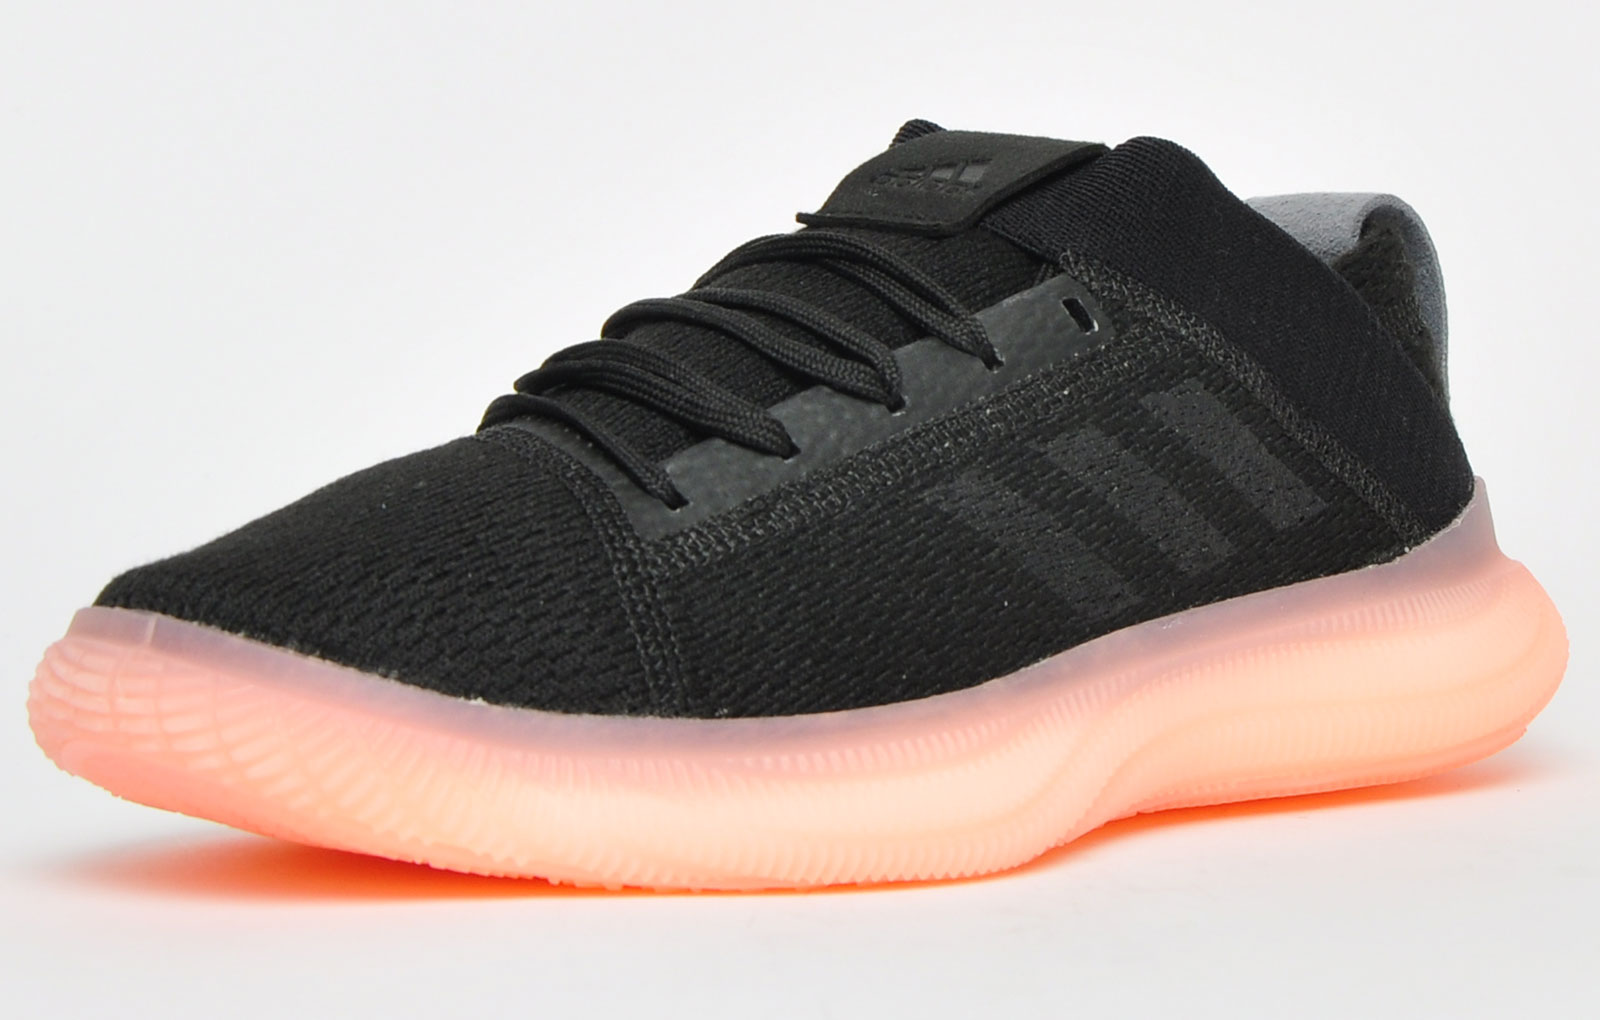 Adidas PureBOOST Trainer Womens Trainers, Size 3.5 in Black / Salmon - By Express Trainers